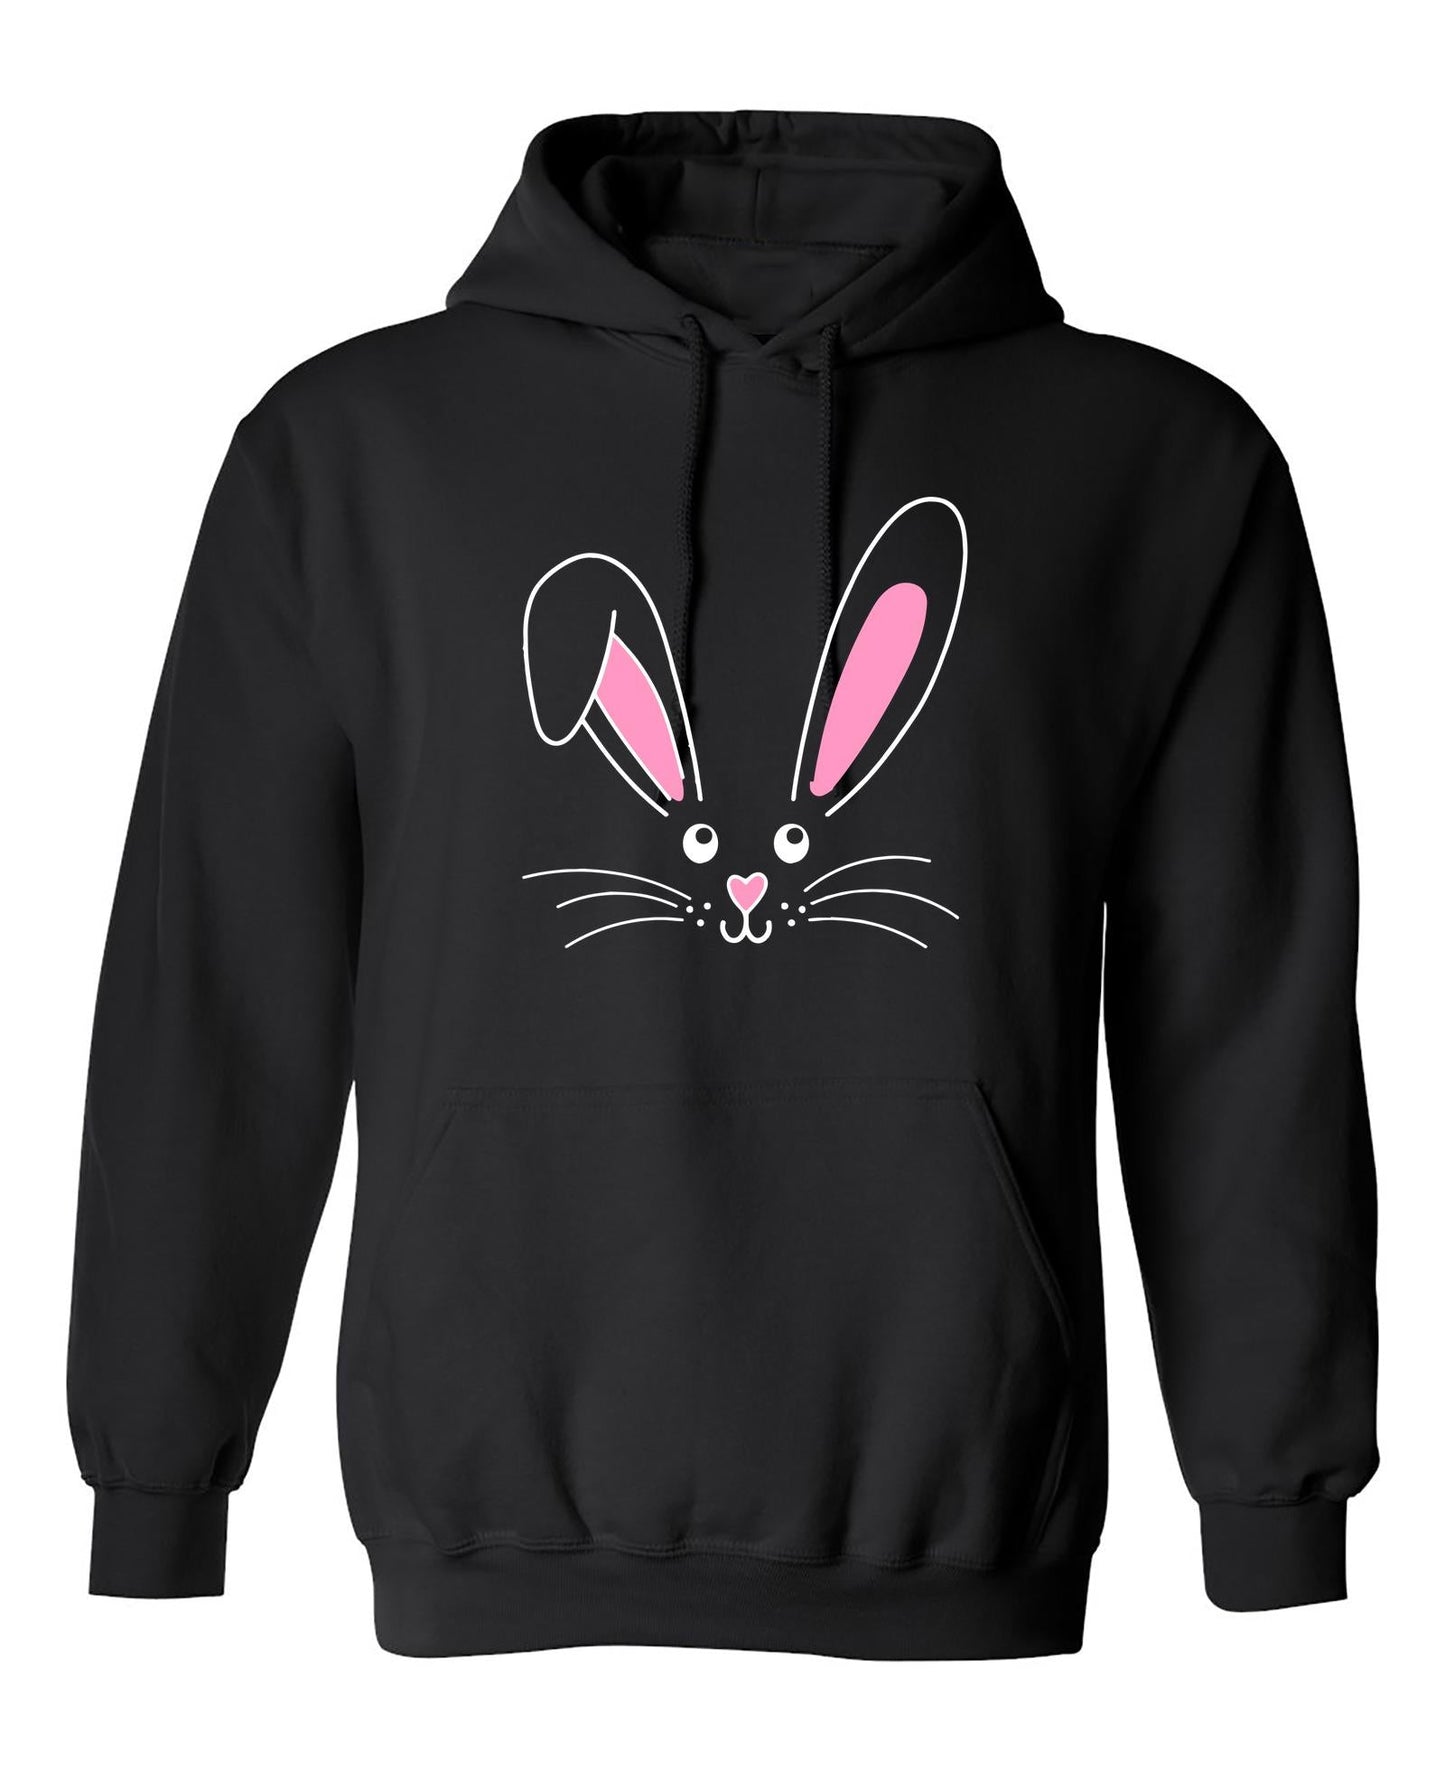 Funny T-Shirts design "BUNNY FACE"